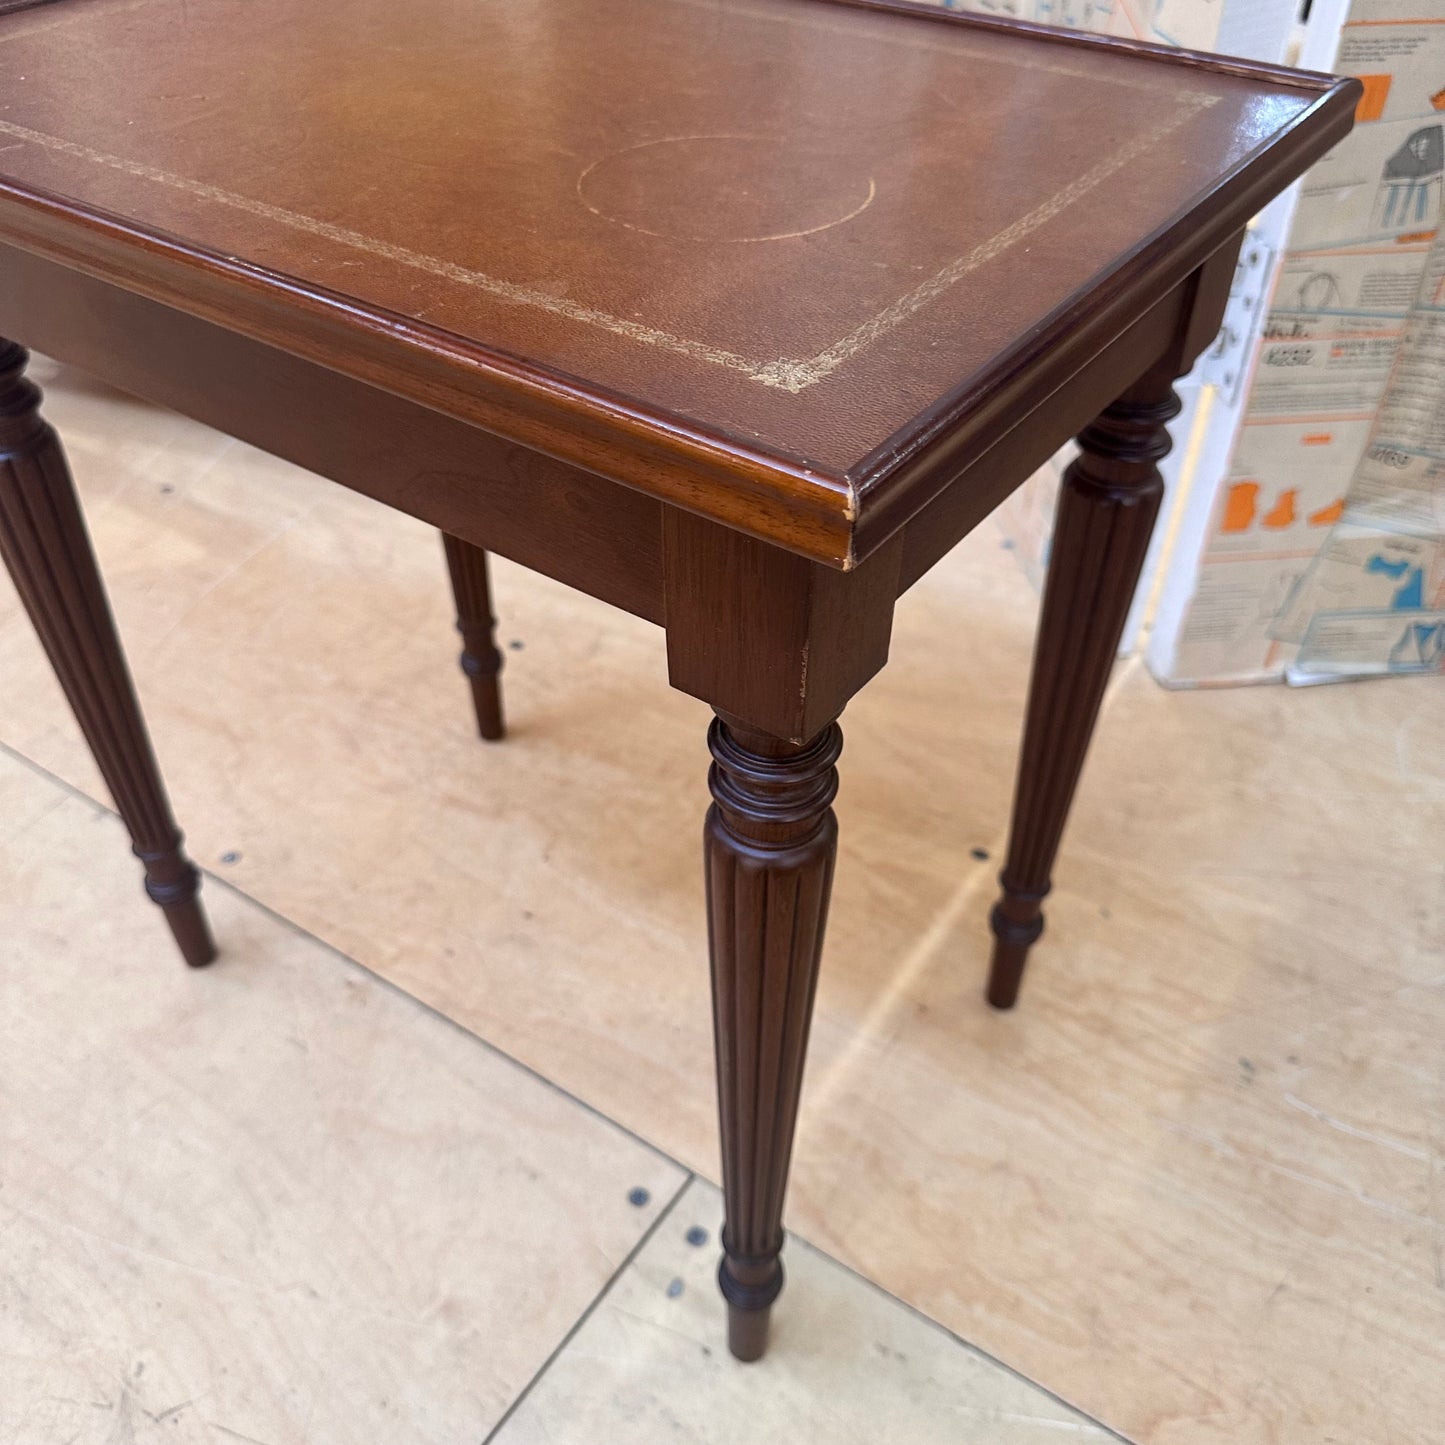 Second Life Furniture - Mahogany Side Table, Leather Topped